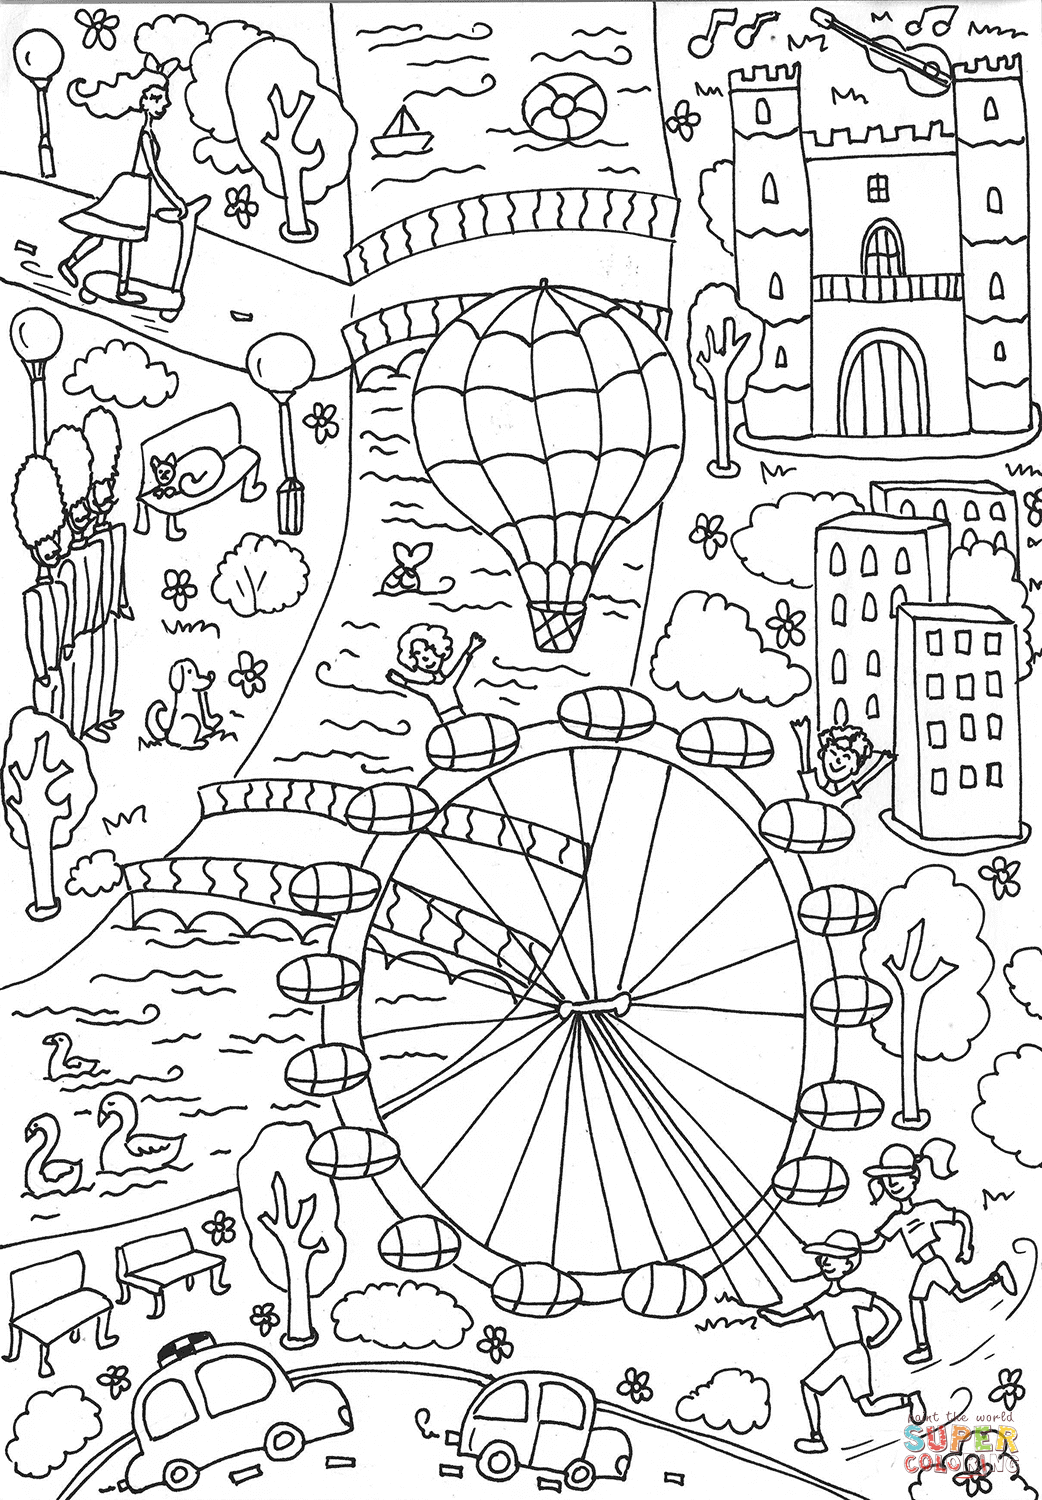 London Eye coloring page | Free Printable Coloring Pages